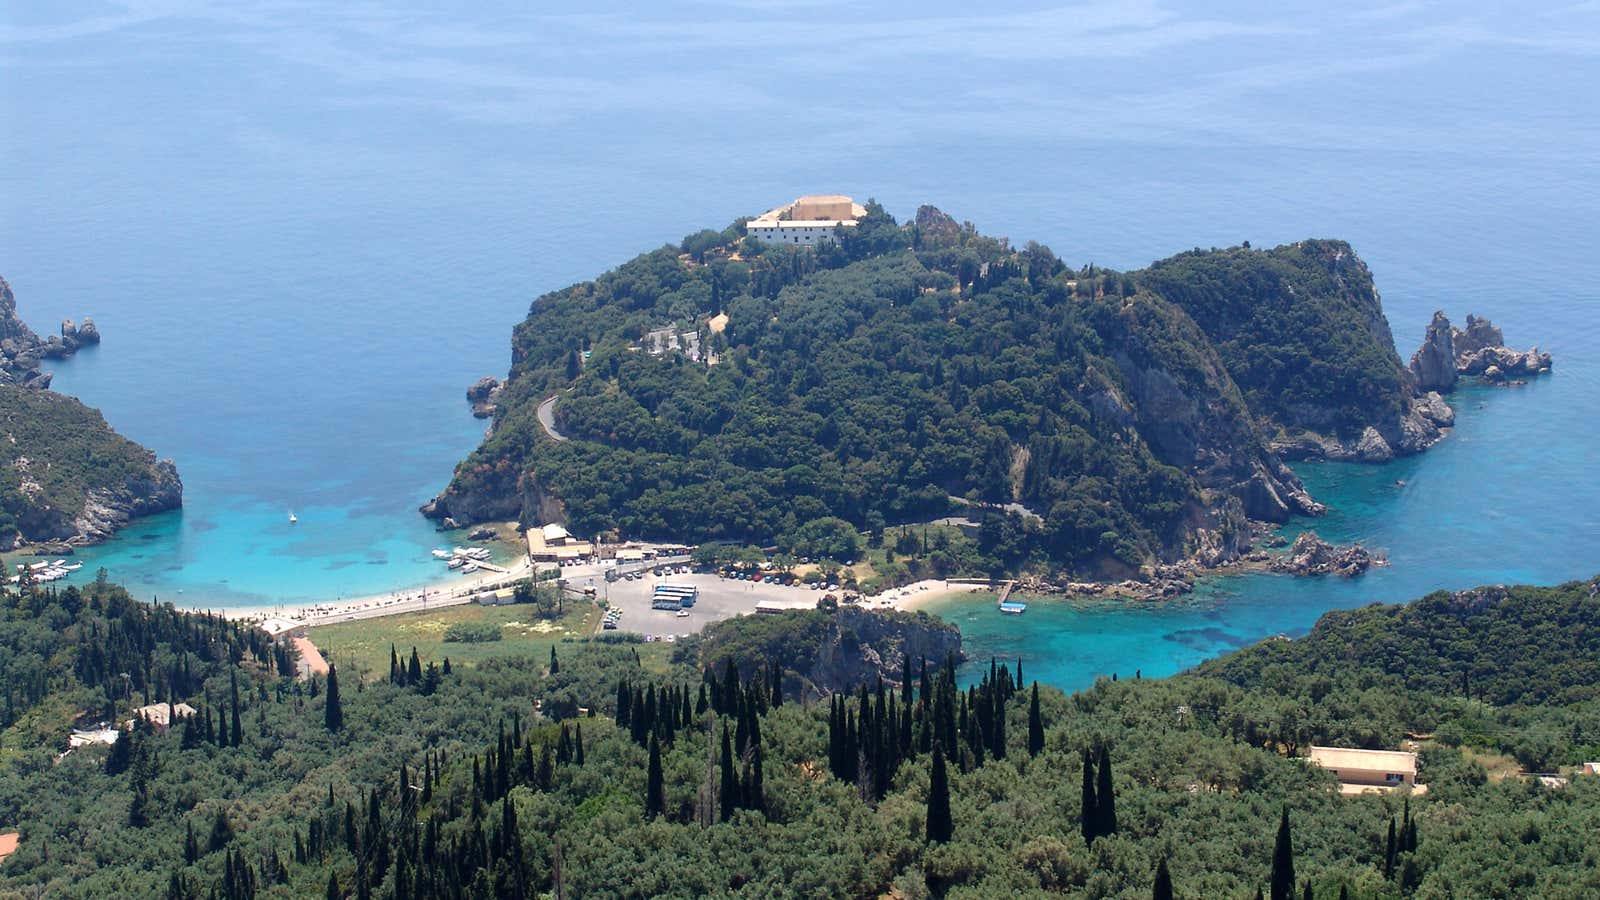 Can Greece let go of the lush beaches of Corfu? It depends how serious it is about saving the rest of the country.